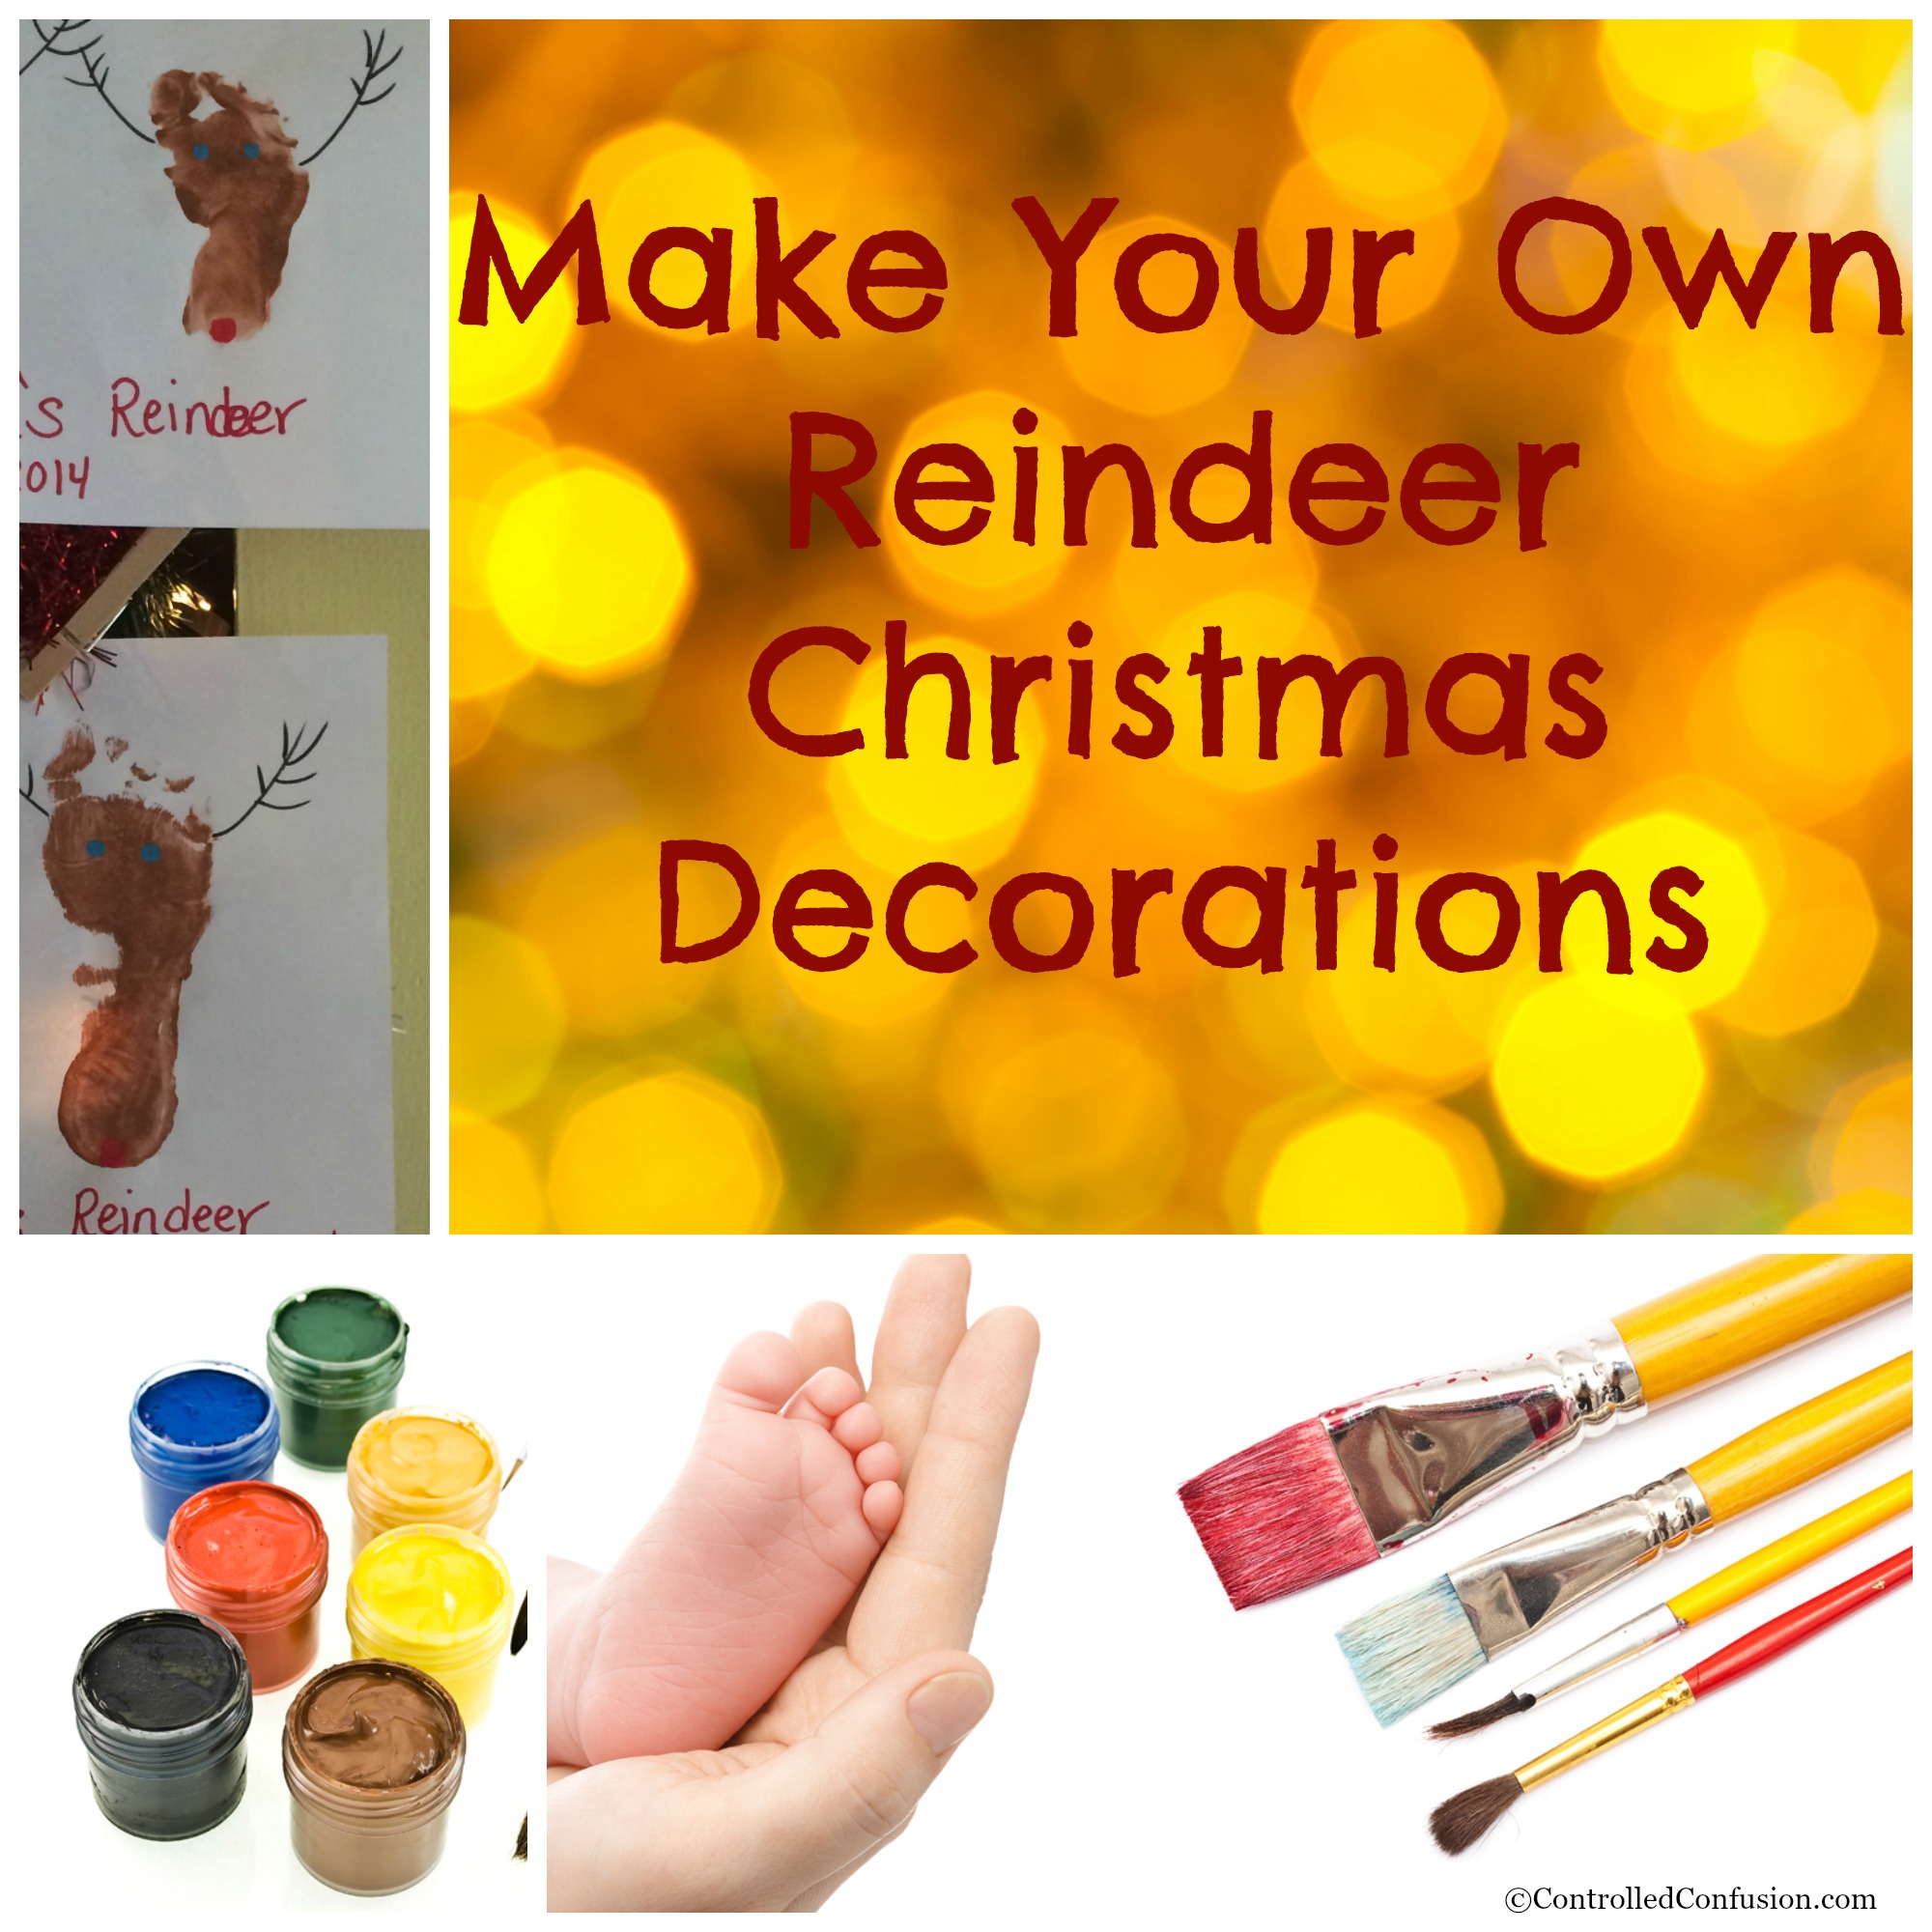 Make Your Own Reindeer Christmas Decorations